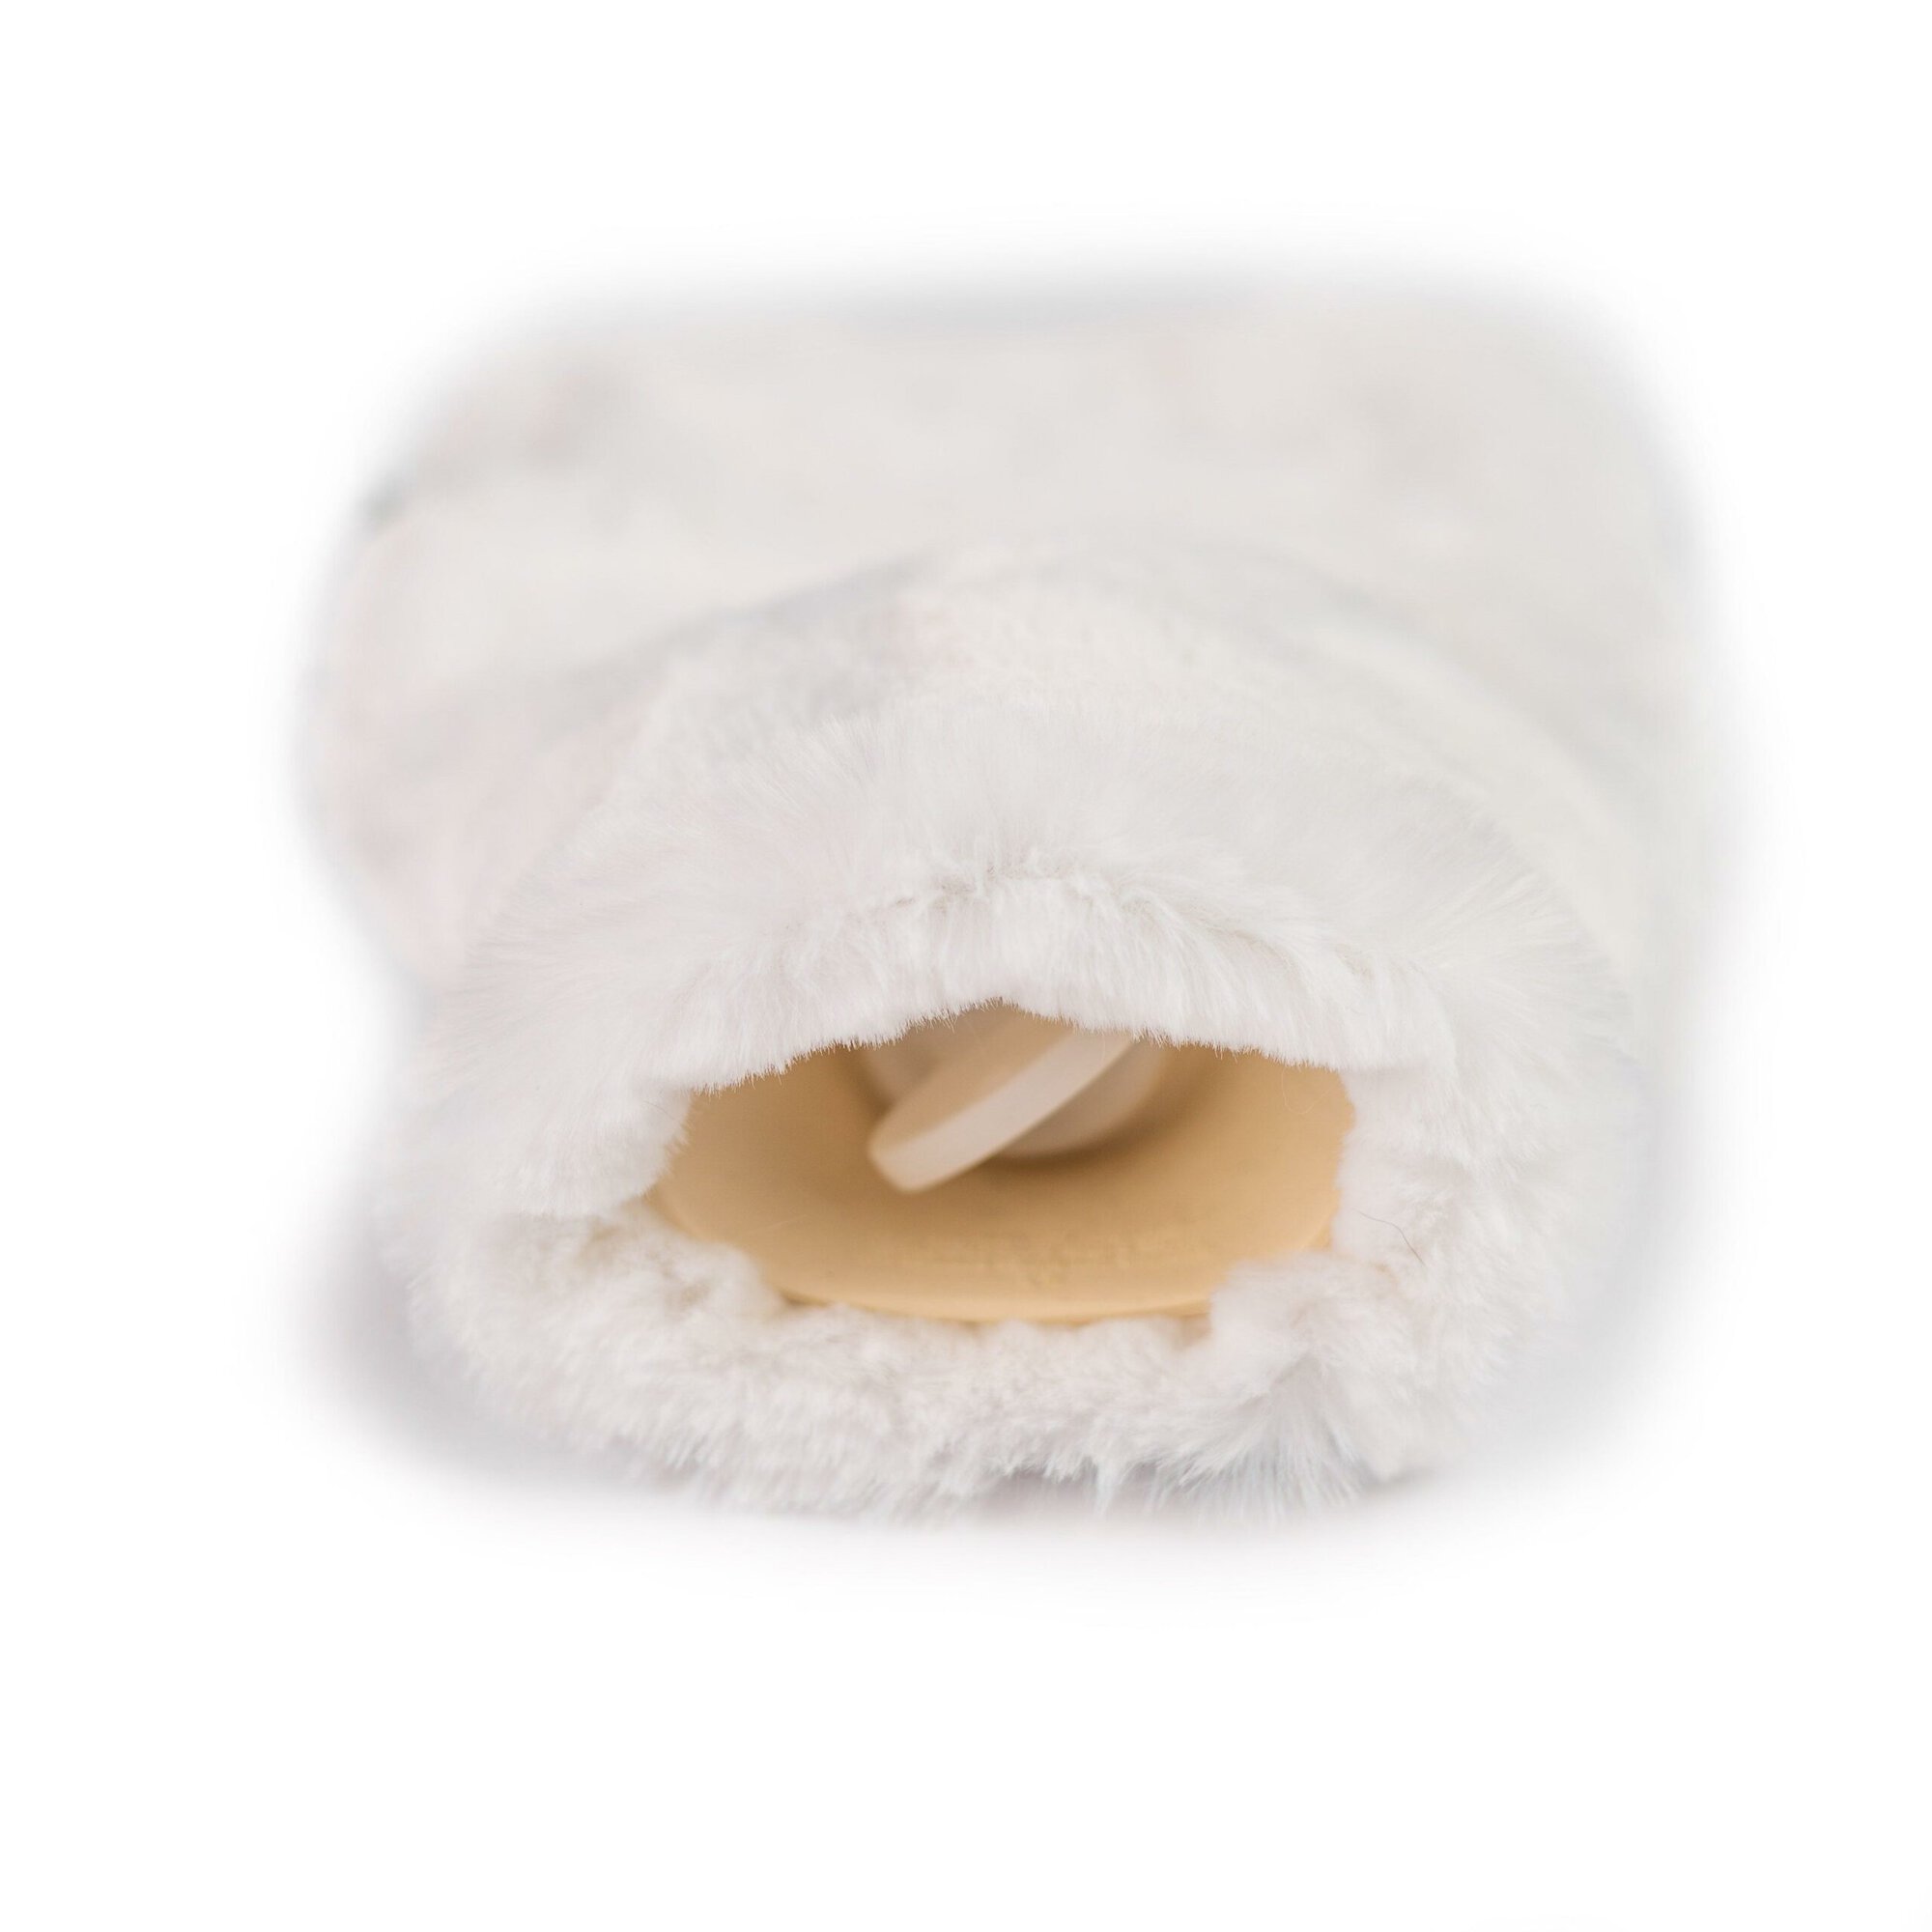 Mini White Faux Fur Cover And 0.5 Litre Natural Rubber Hot Water Bottle